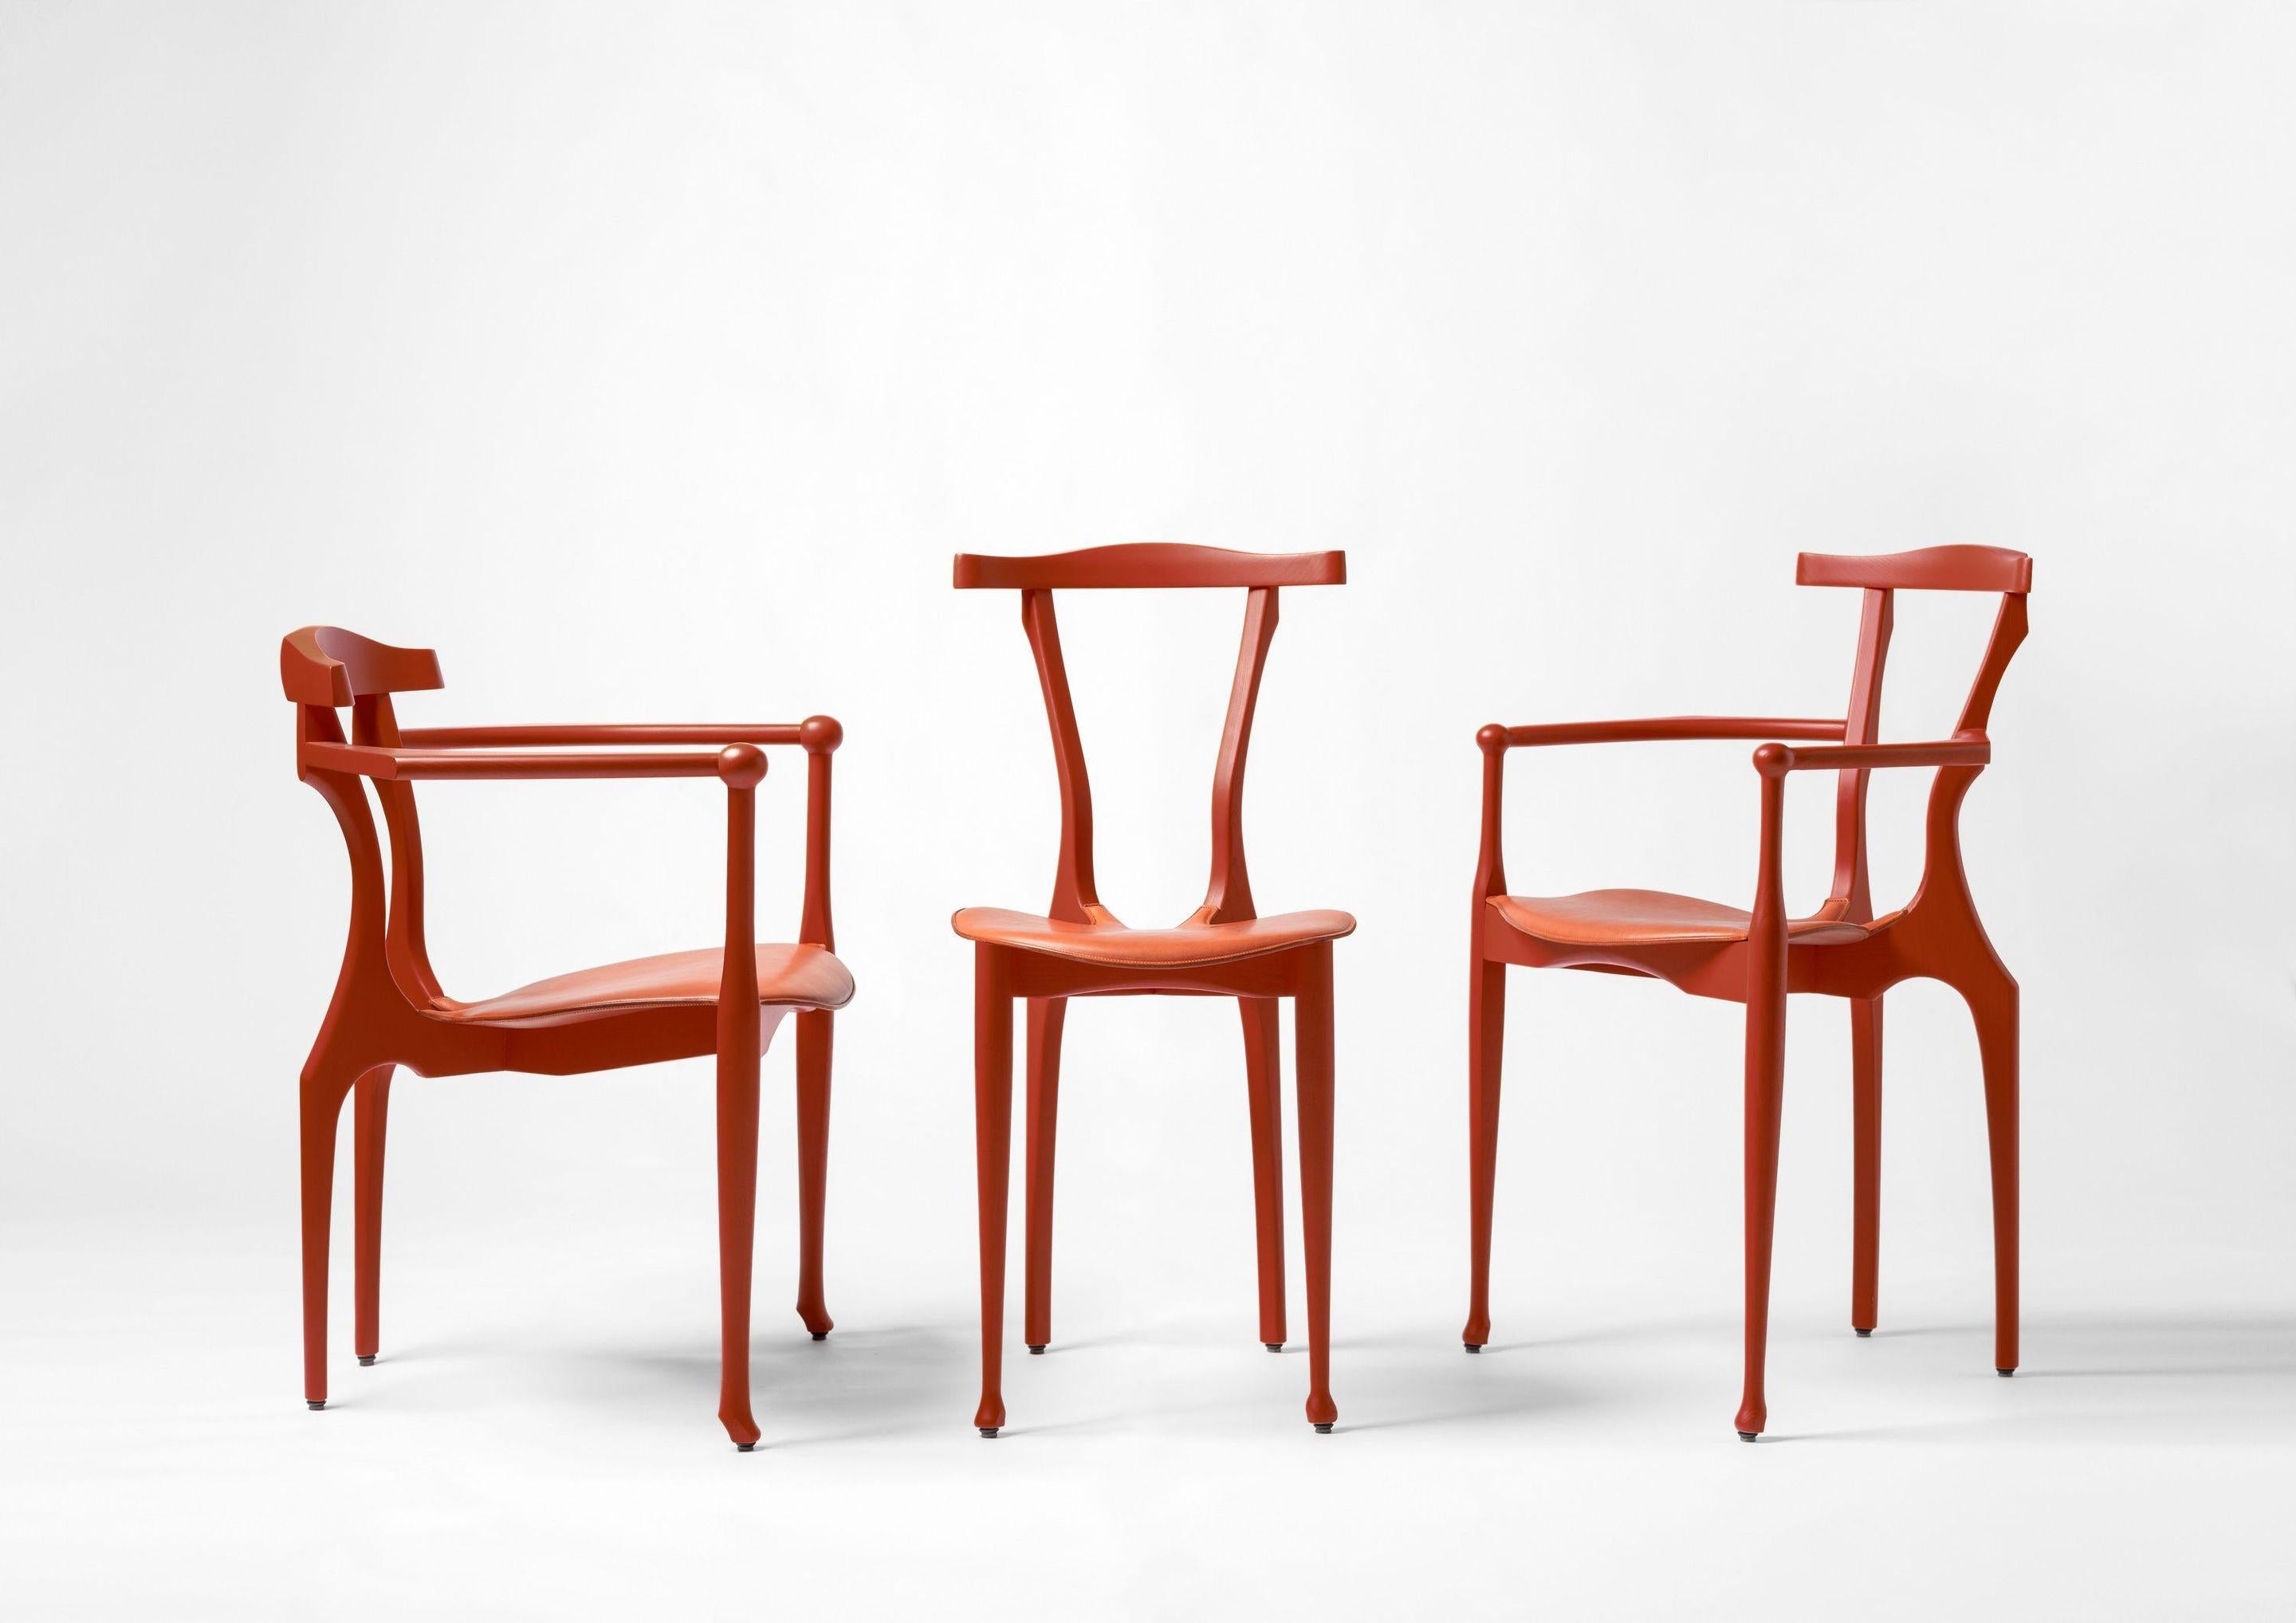 The Gaulinetta is an evolution of the Gaulino chair. In words of Oscar Tusquets -In homage to Enzo Mari, who called his chair Tonietta, a derivative of Thonet, I’ve called this chair Gaulinetta, after the Gaulino.-

The Gaulino chair was designed in